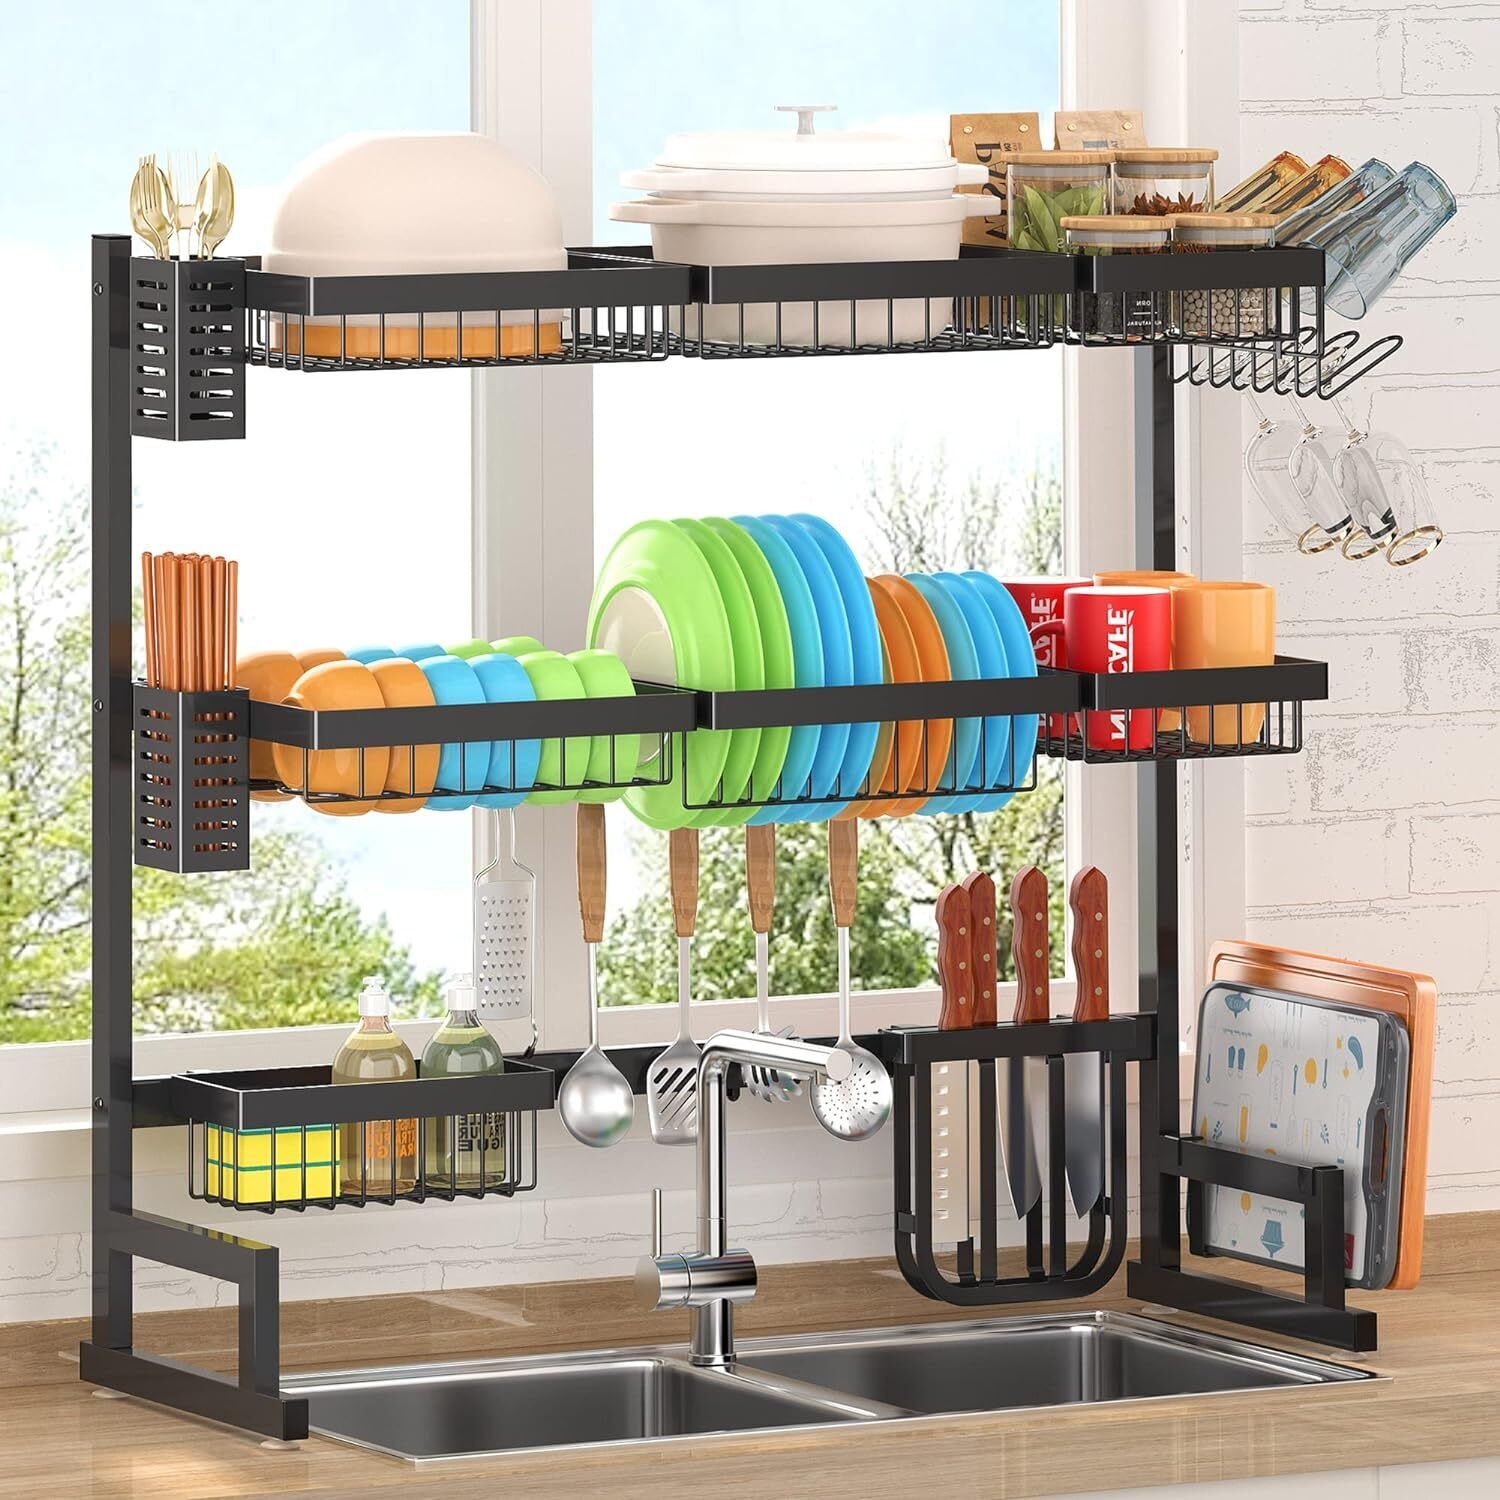 Over Sink Dish Drying Rack 3 Tier, 2 Cutlery Holders Adjustable Dish Drainer